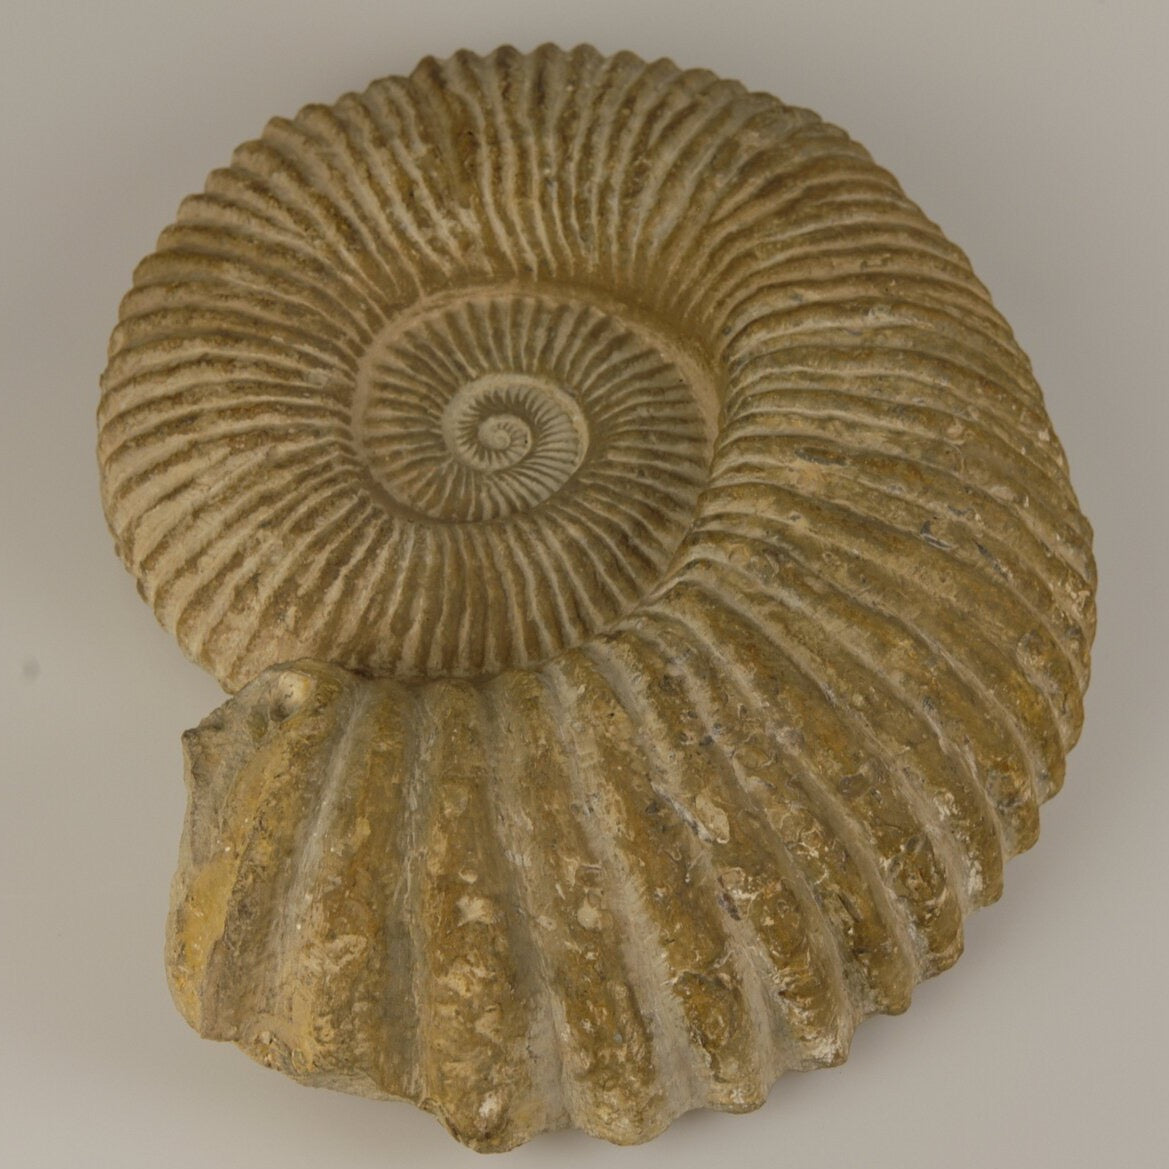 Ammonite fossil from North Africa